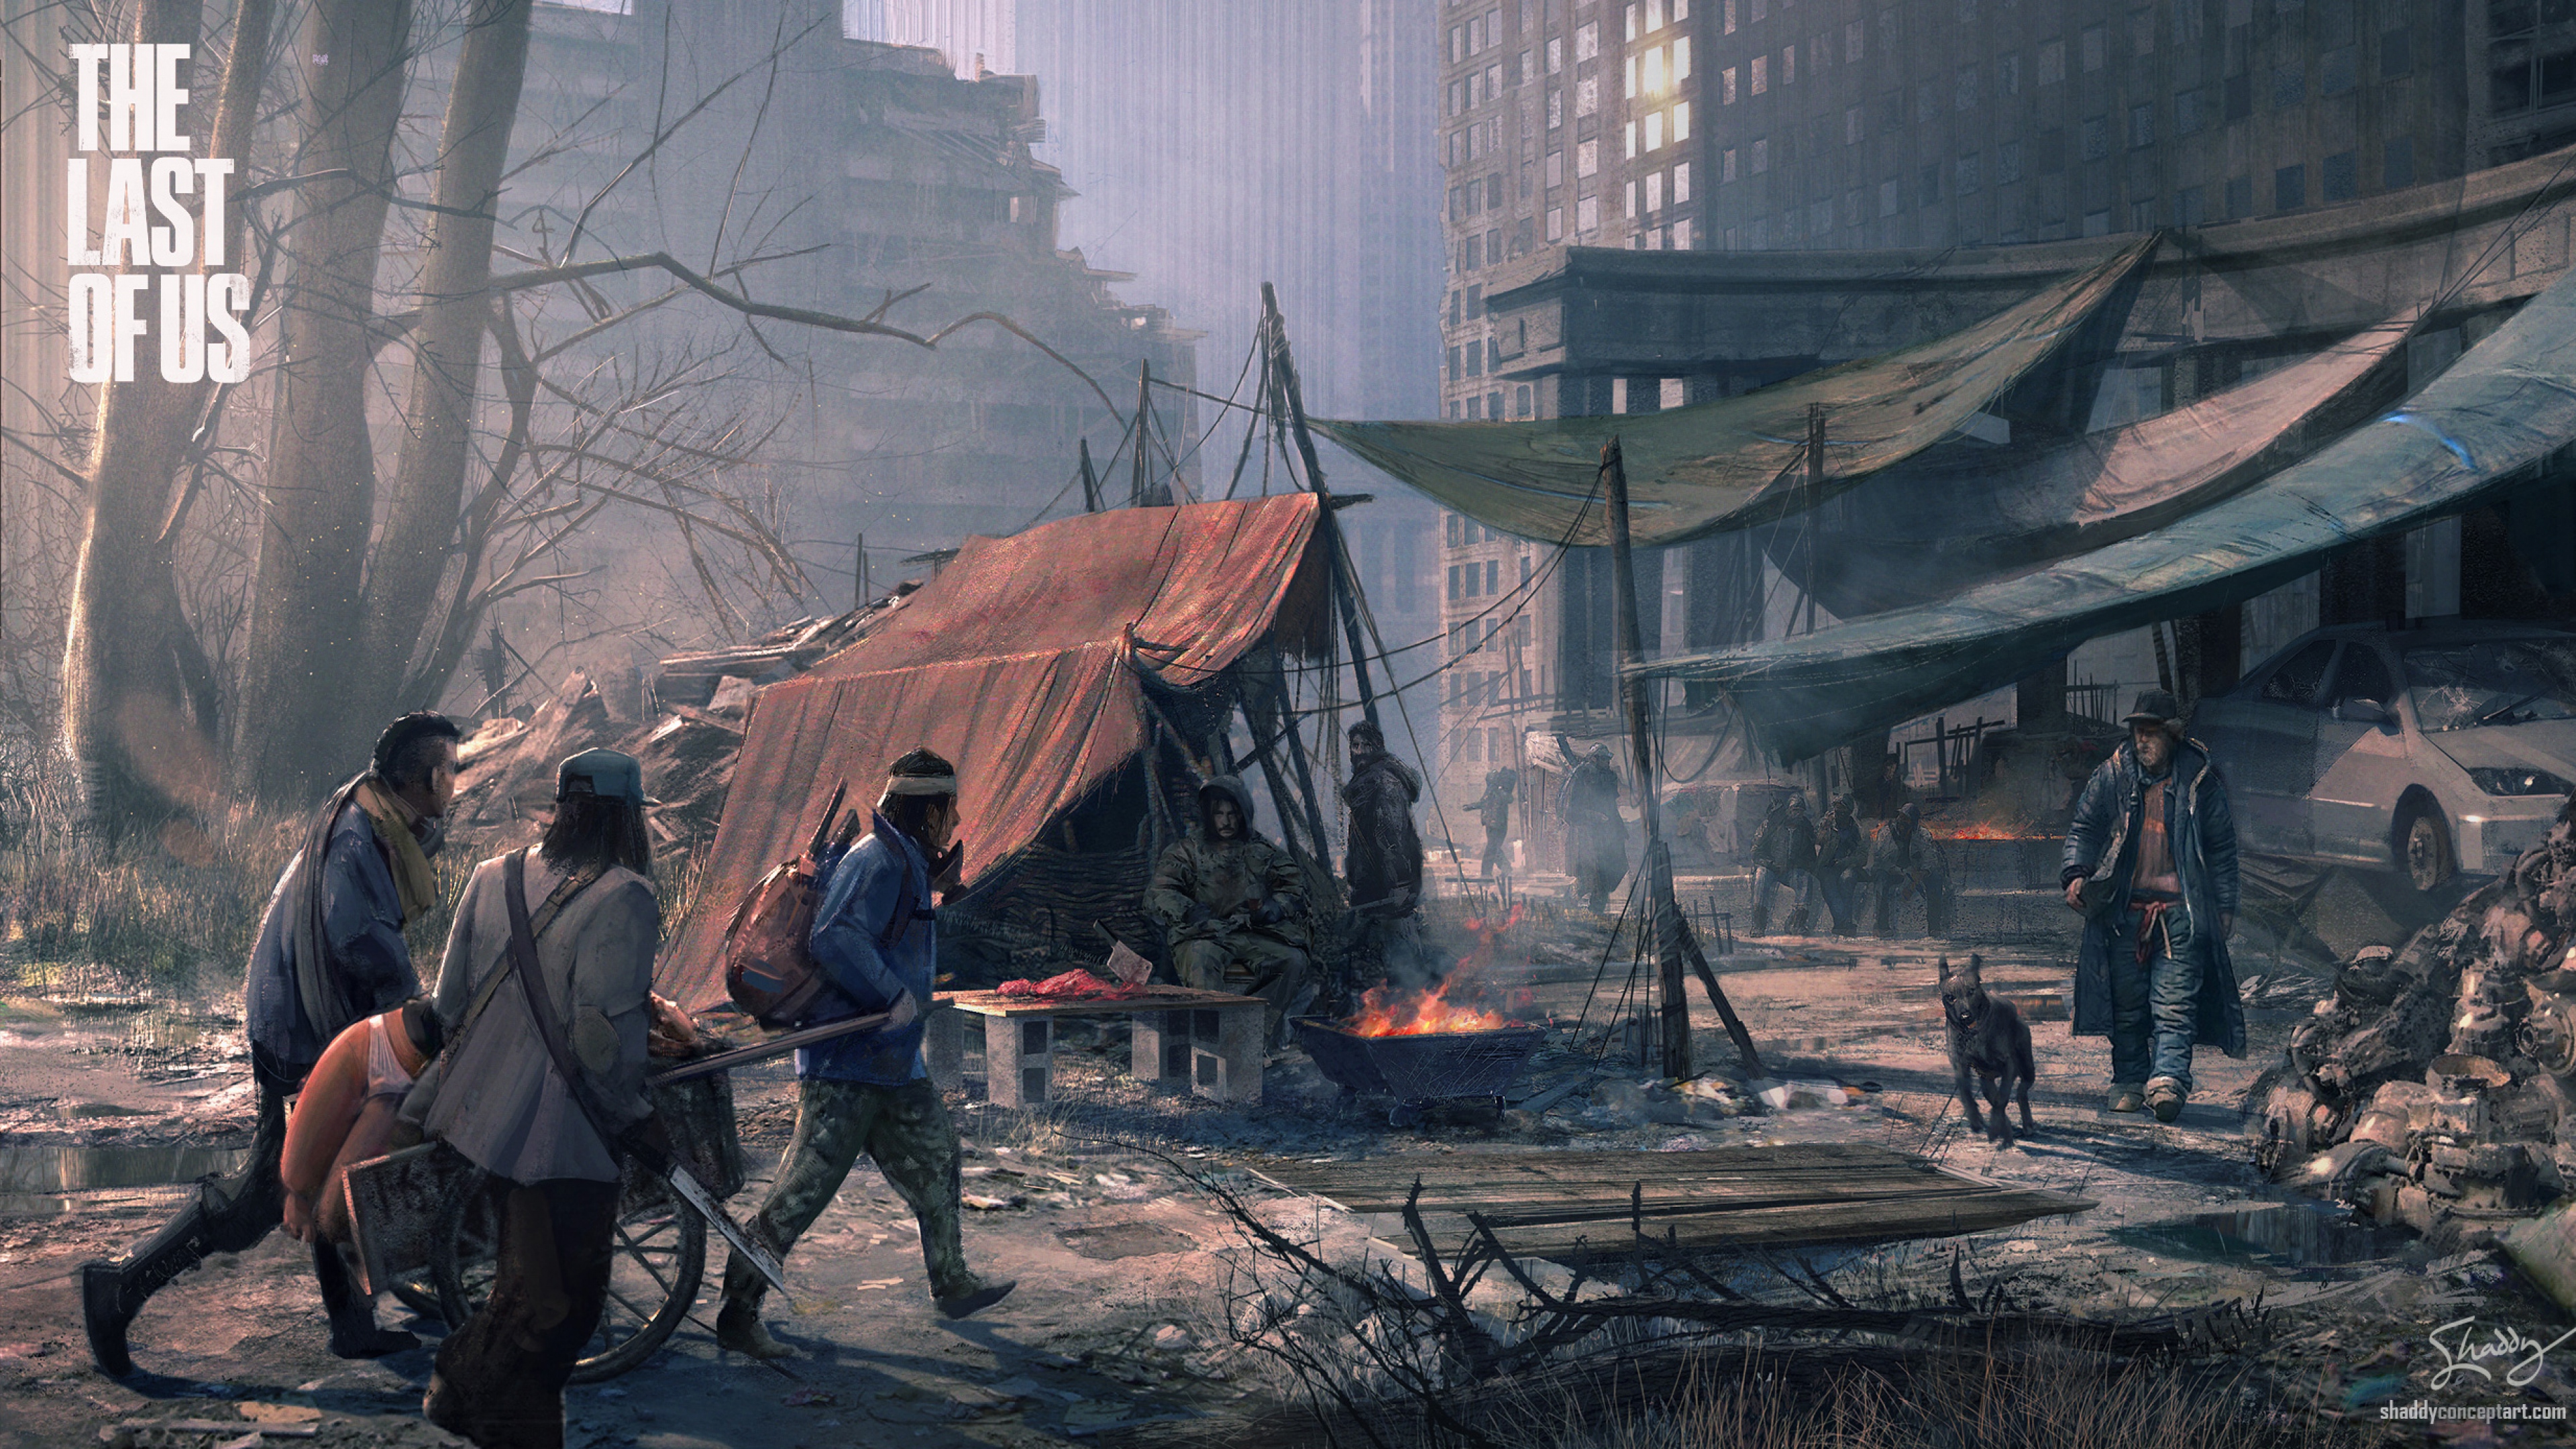 Download Wallpaper 3840x2160 The last of us, City, Doomsday ...